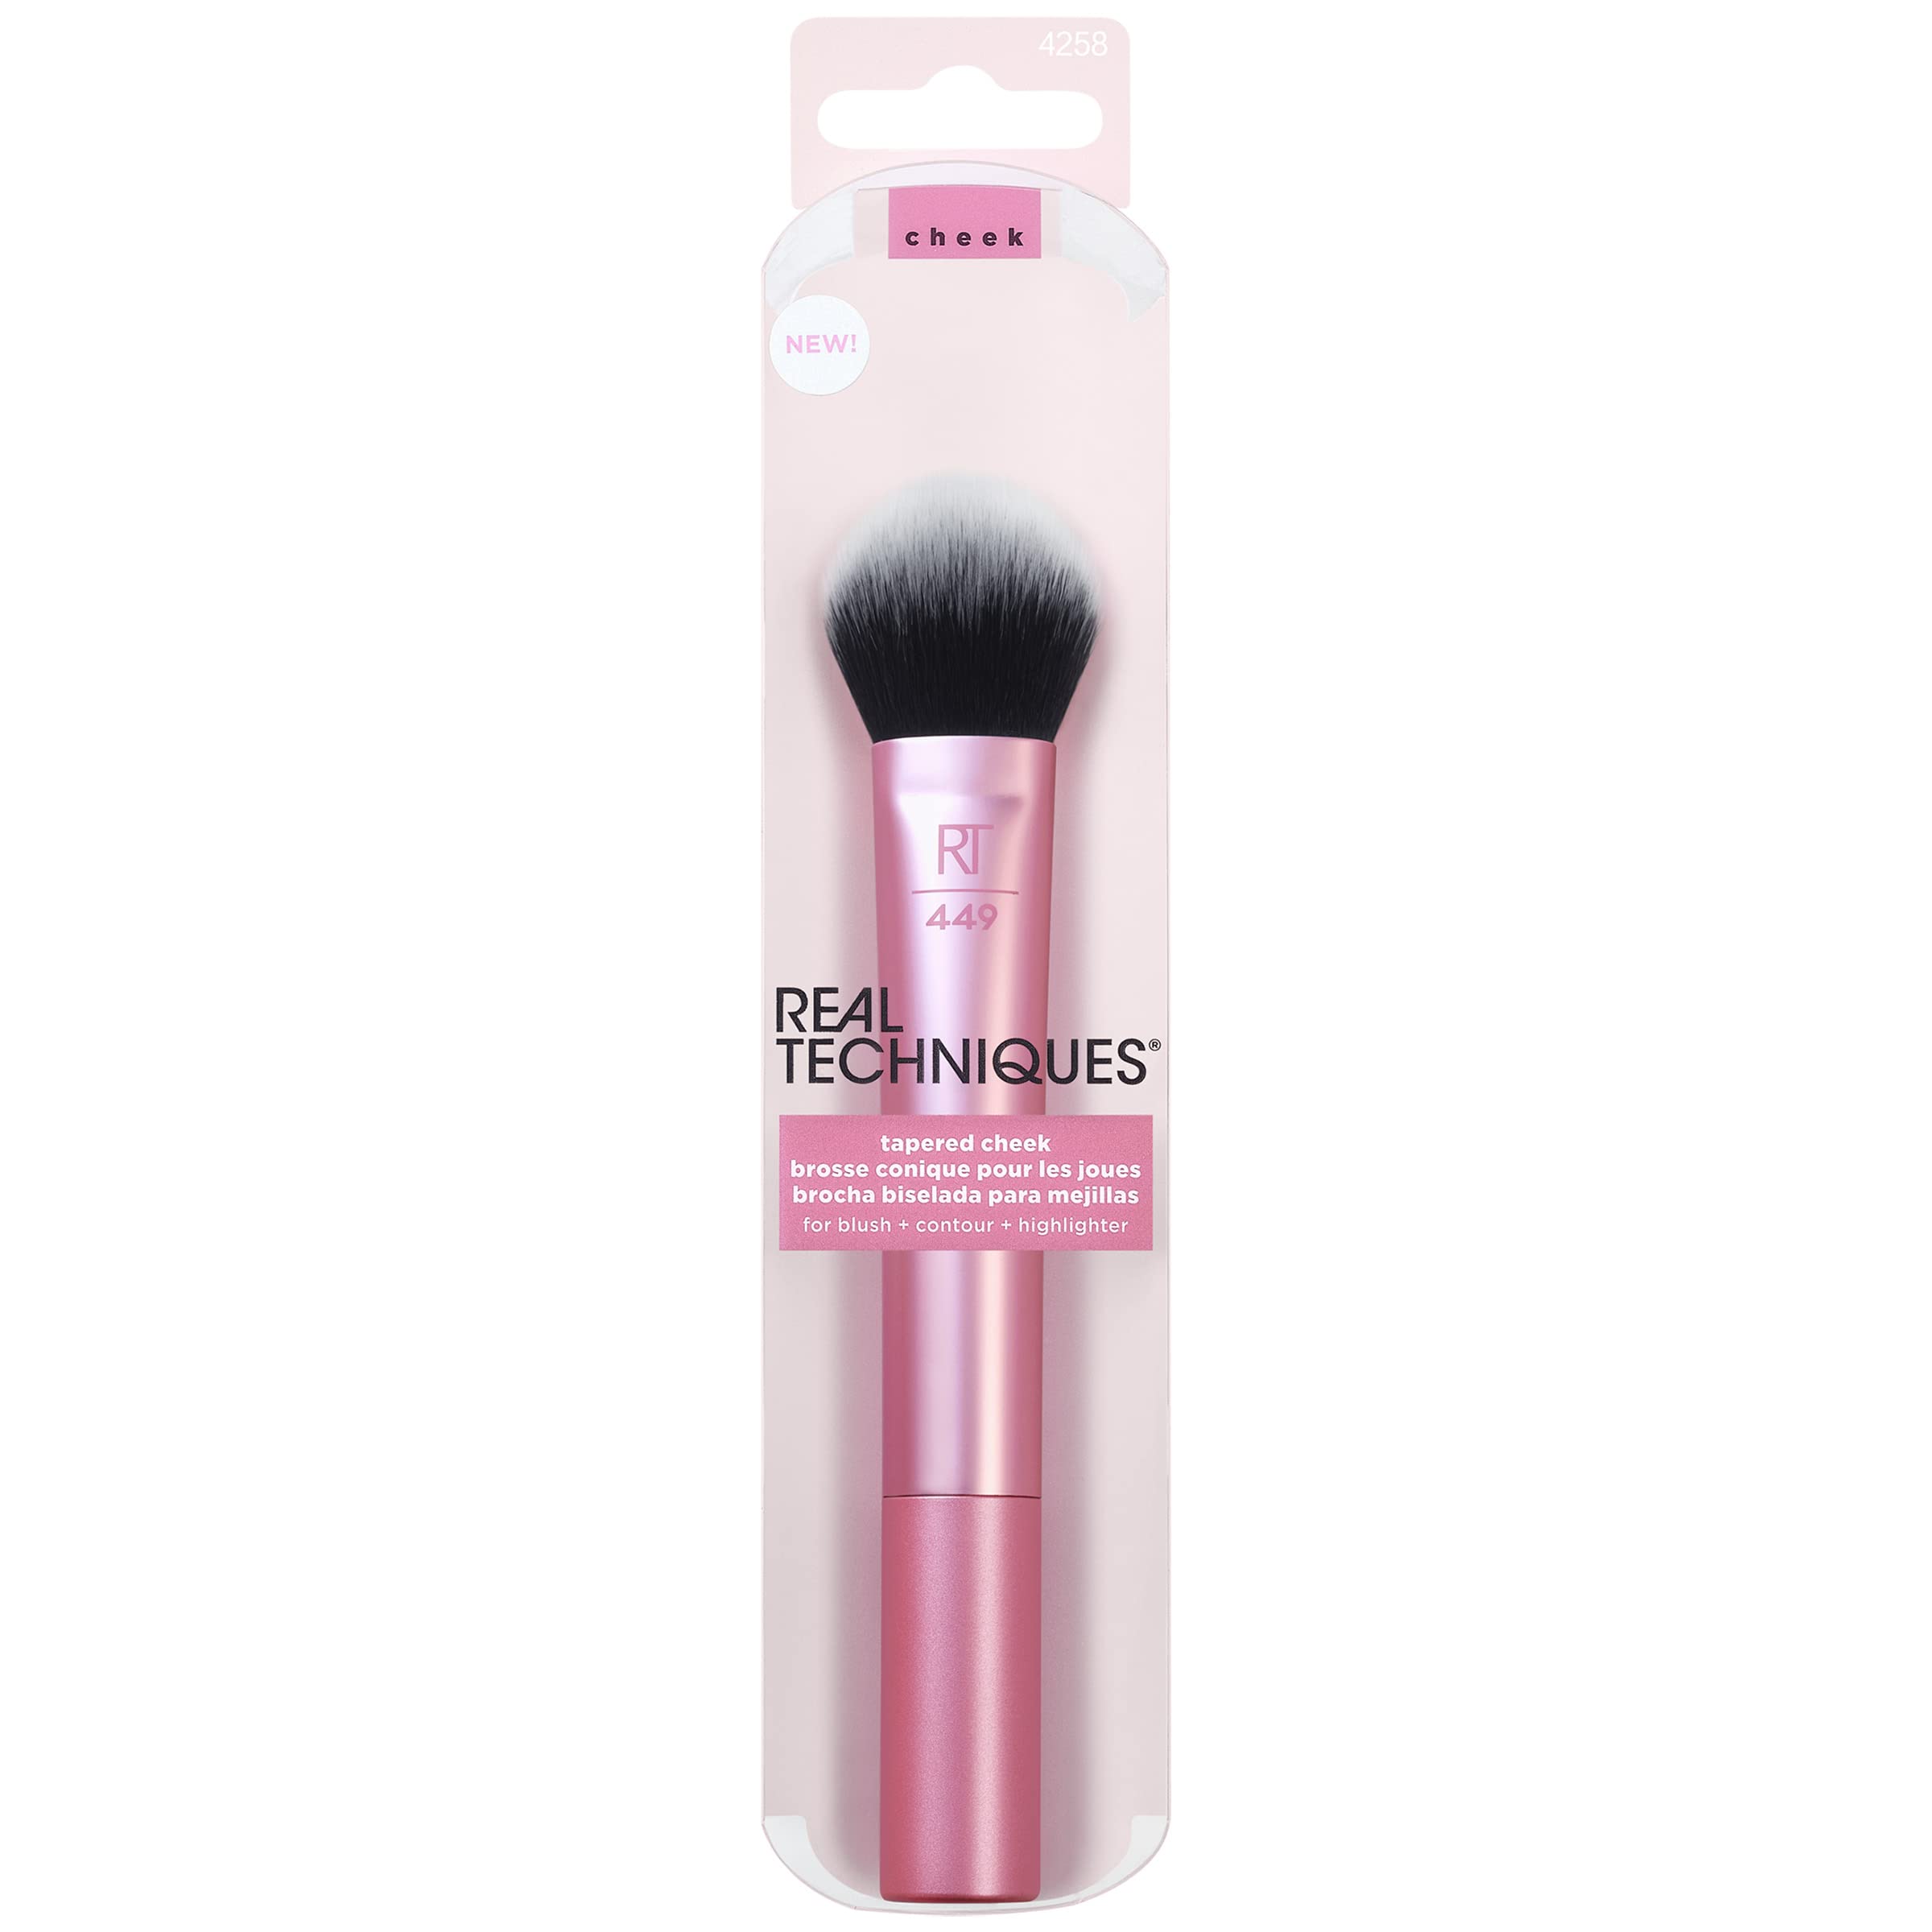 Real Techniques Tapered Cheek Makeup Brush, For Blush, Highlighter, Loose, Or Pressed Powder, Soft, Synthetic Bristles, Precise Makeup Application, Aluminum Handle, Cruelty Free, 1 Count